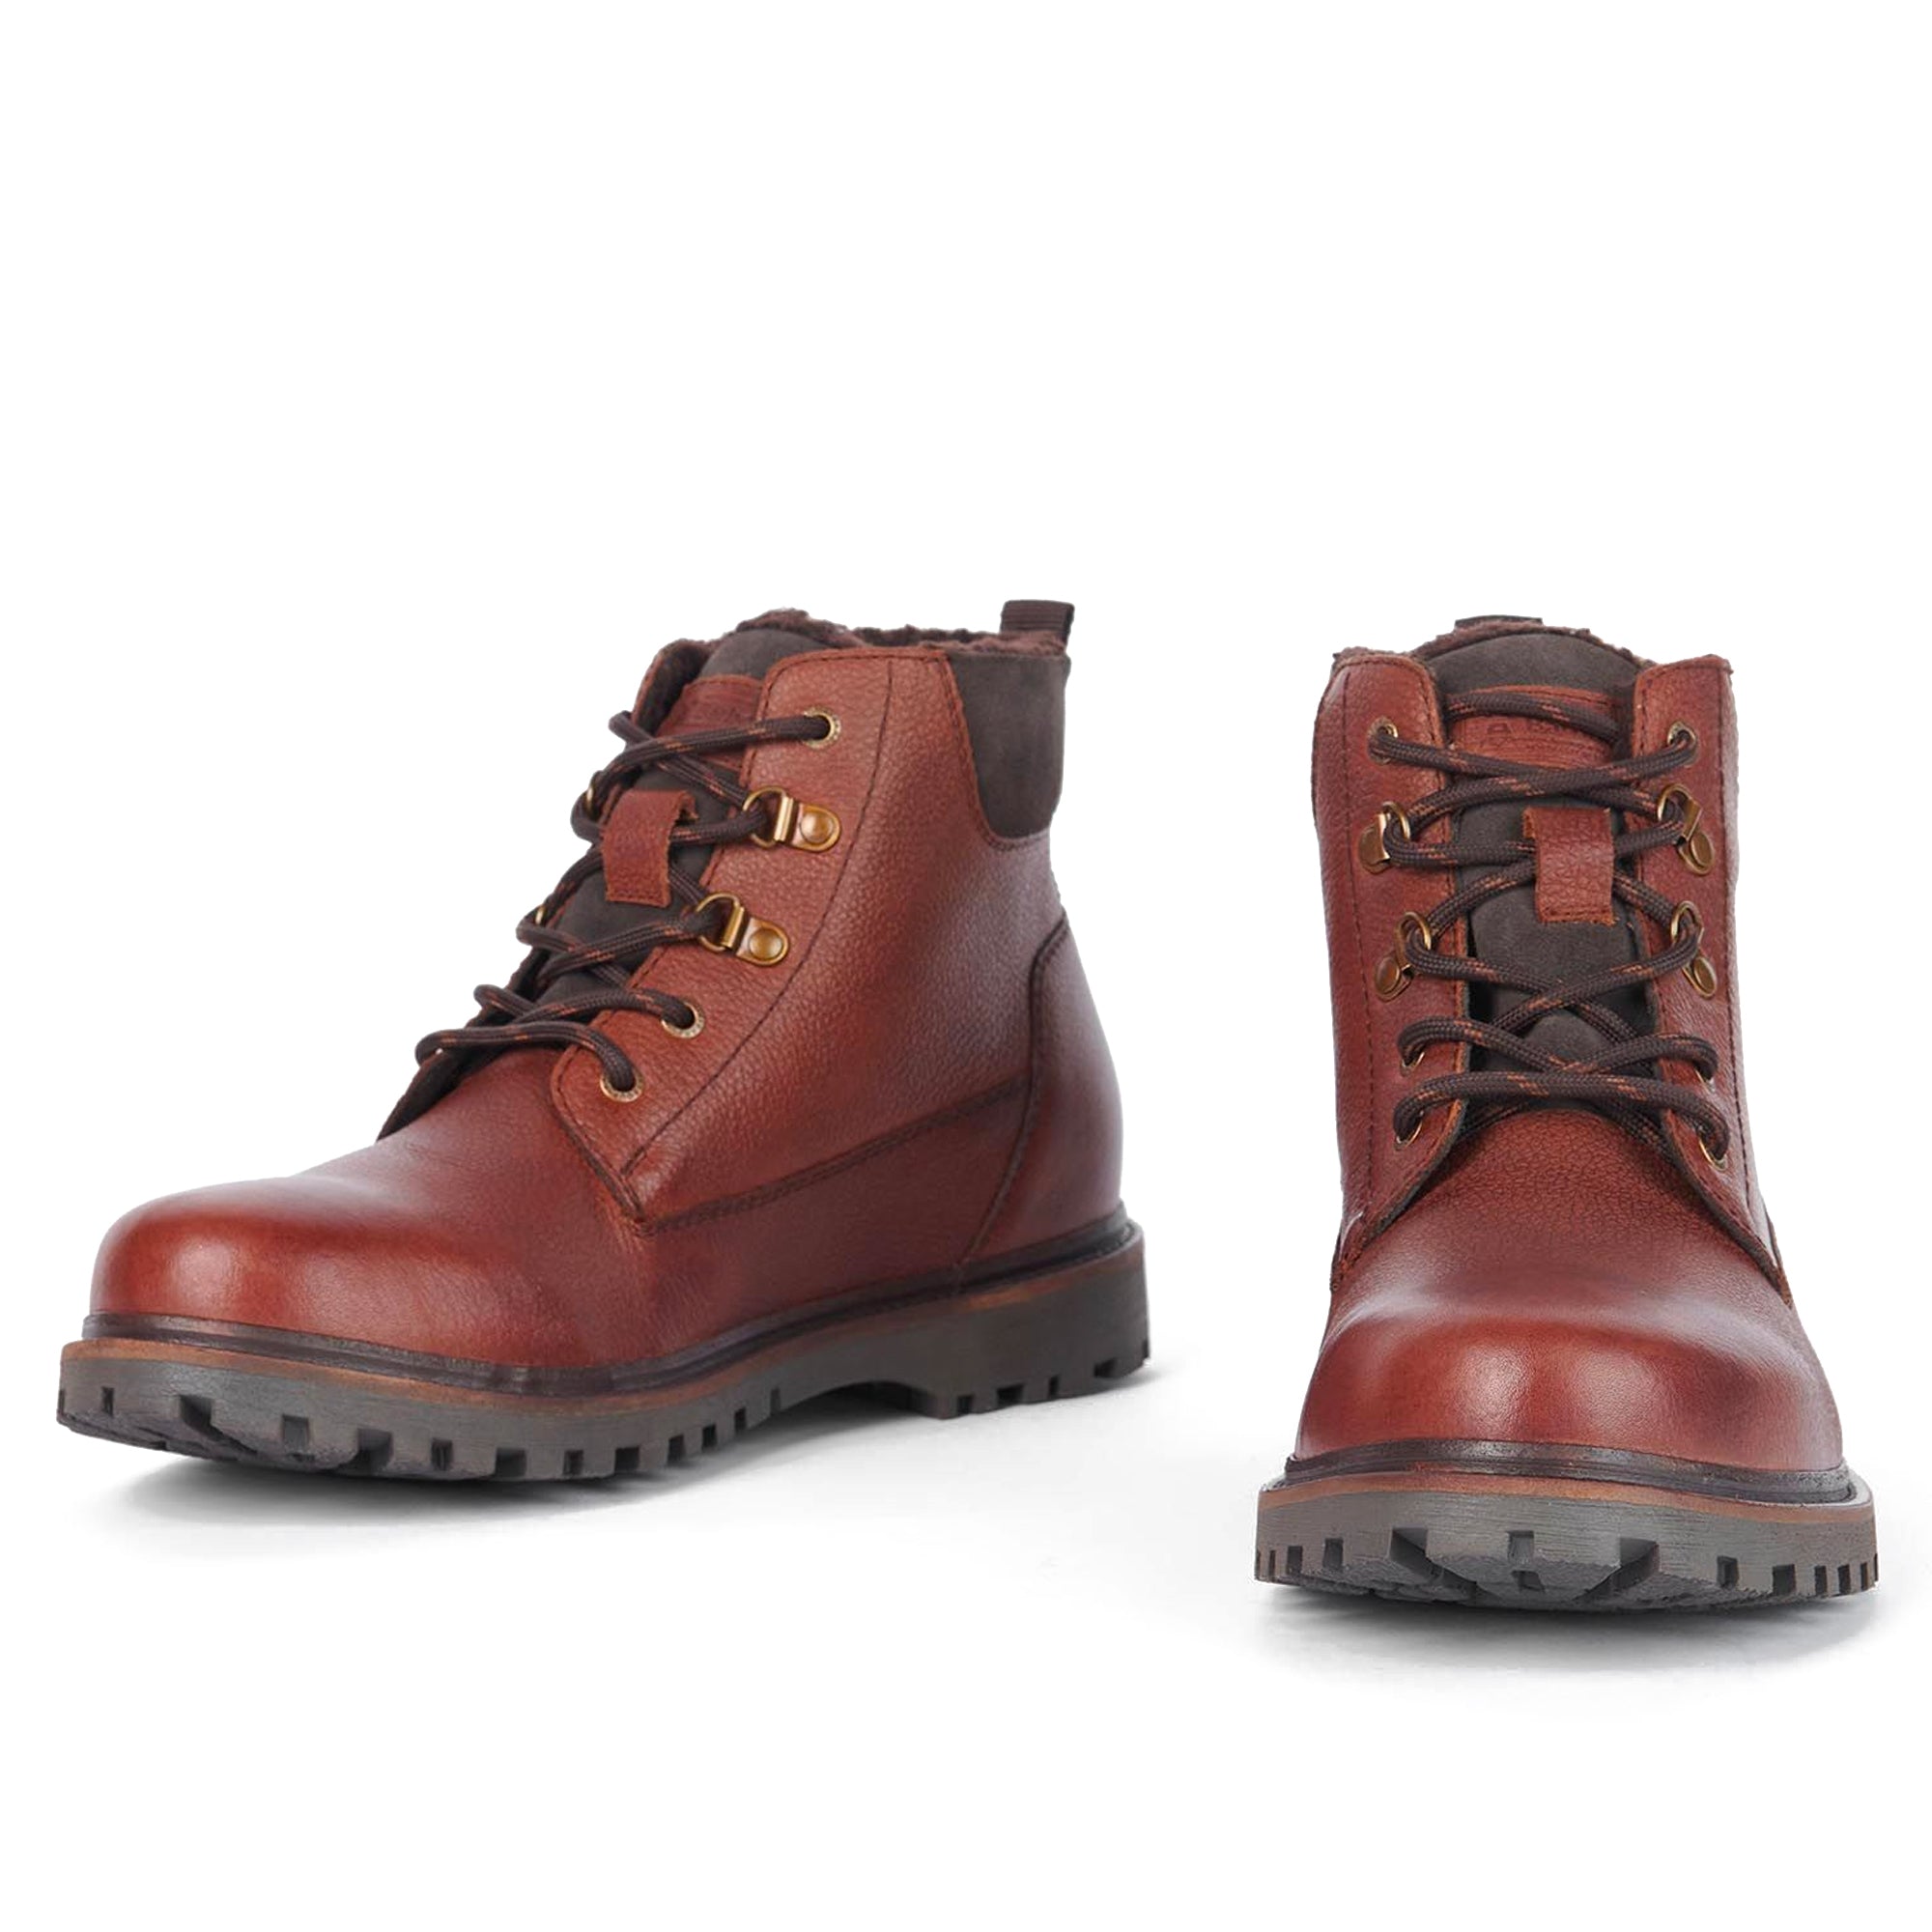 Barbour Storr Walking Boot - Conker Leather